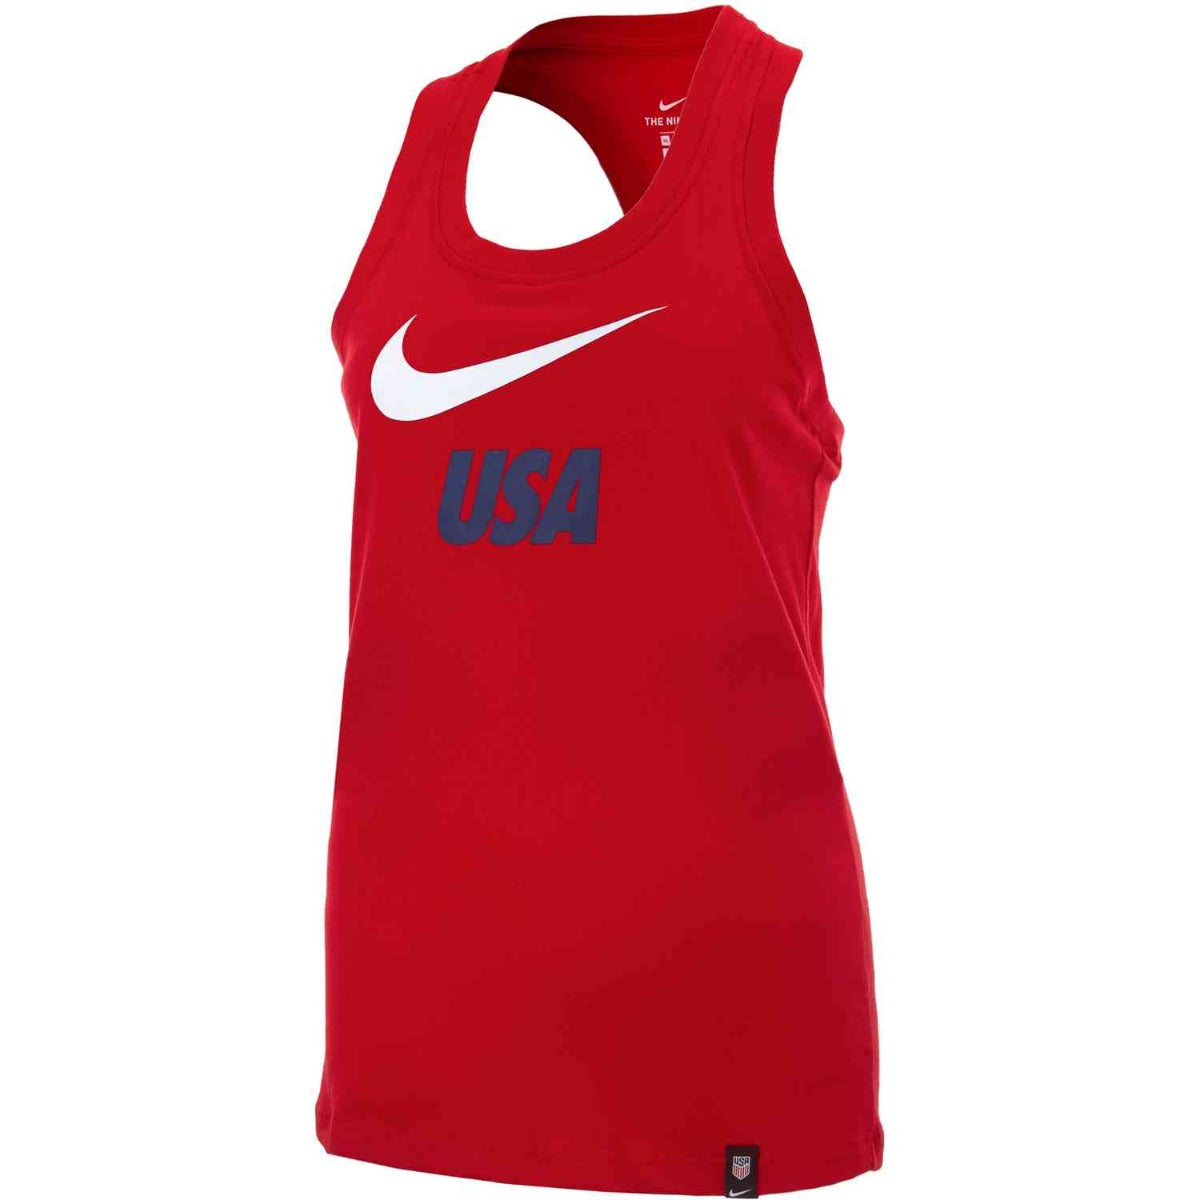 Nike USA 2019-20 Graphic WOMEN'S Tank Top - Red